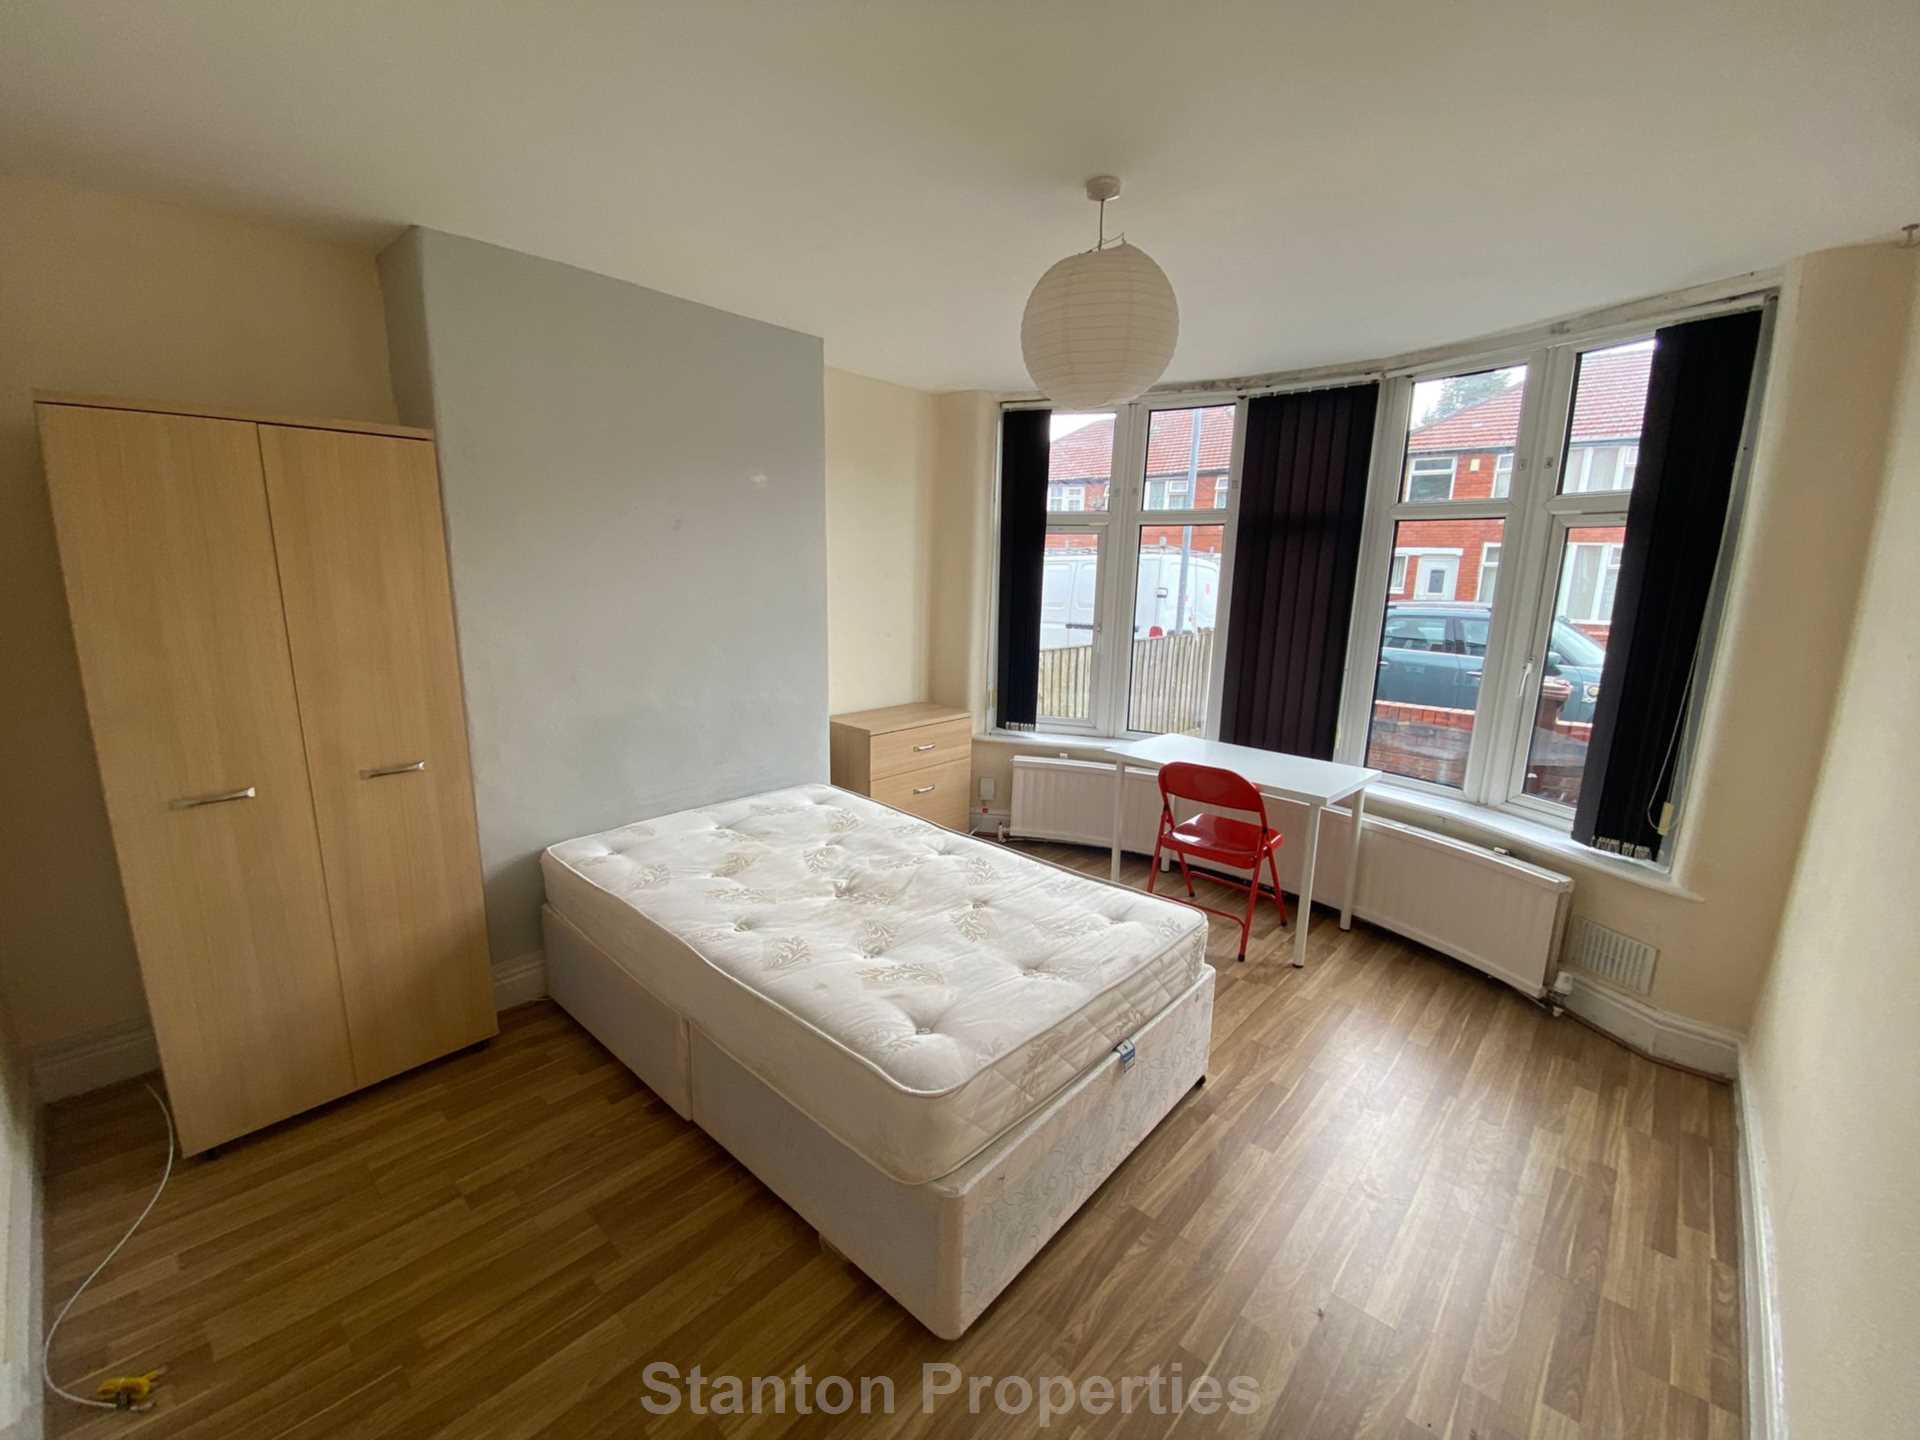 £120 pppw, Weld Road, Withington, Image 6